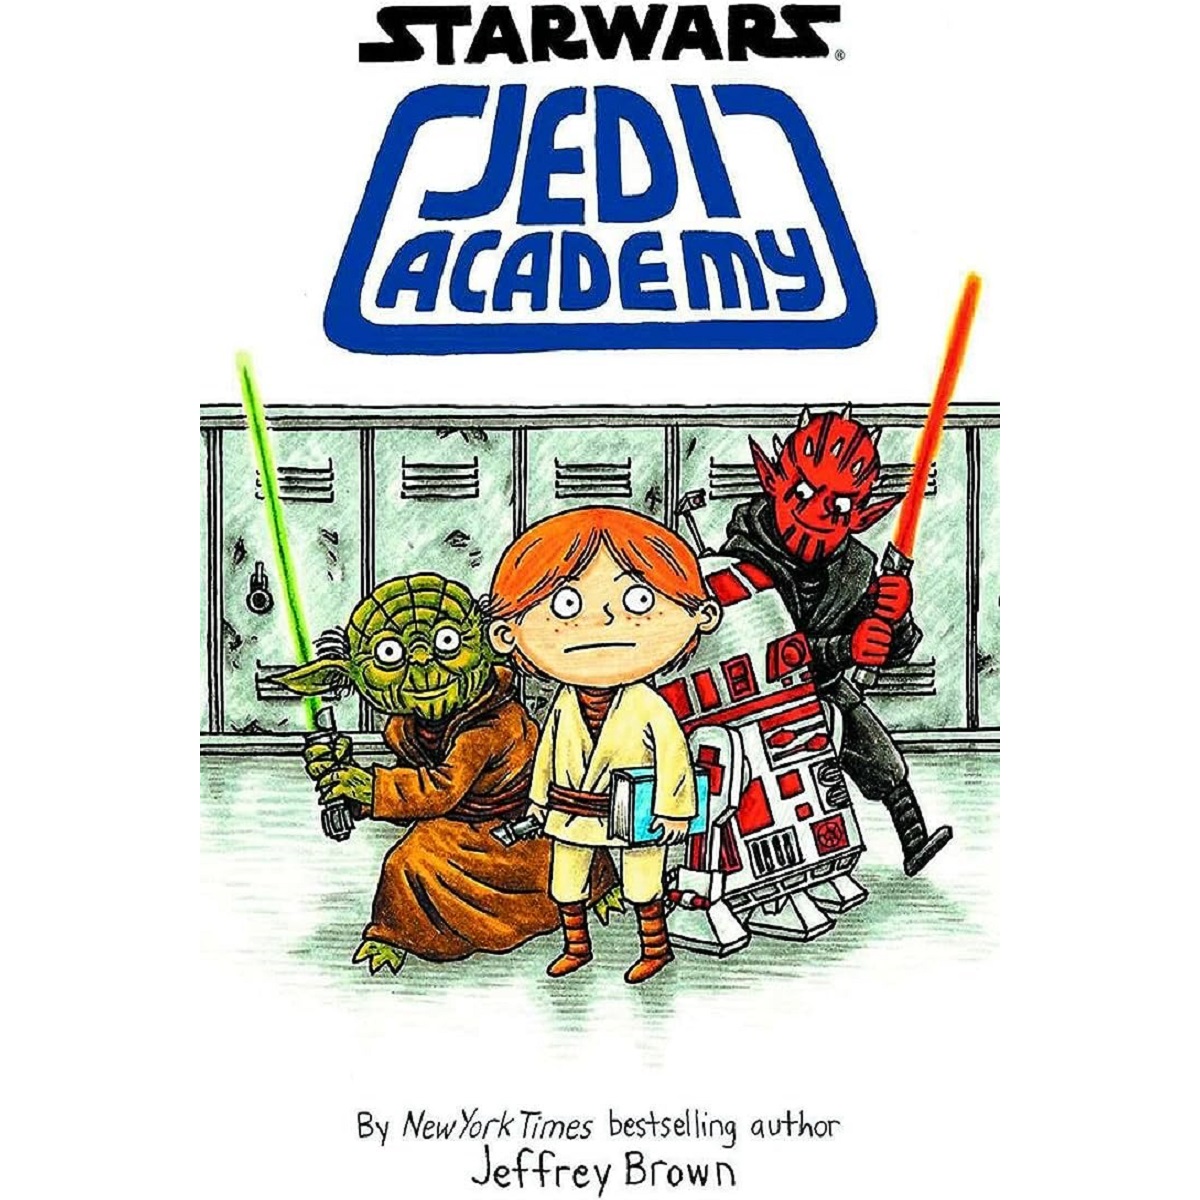 https://www.tarbiyahbooksplus.com/shop/islamic-books-and-products-for-children/star-wars-jedi-academy/